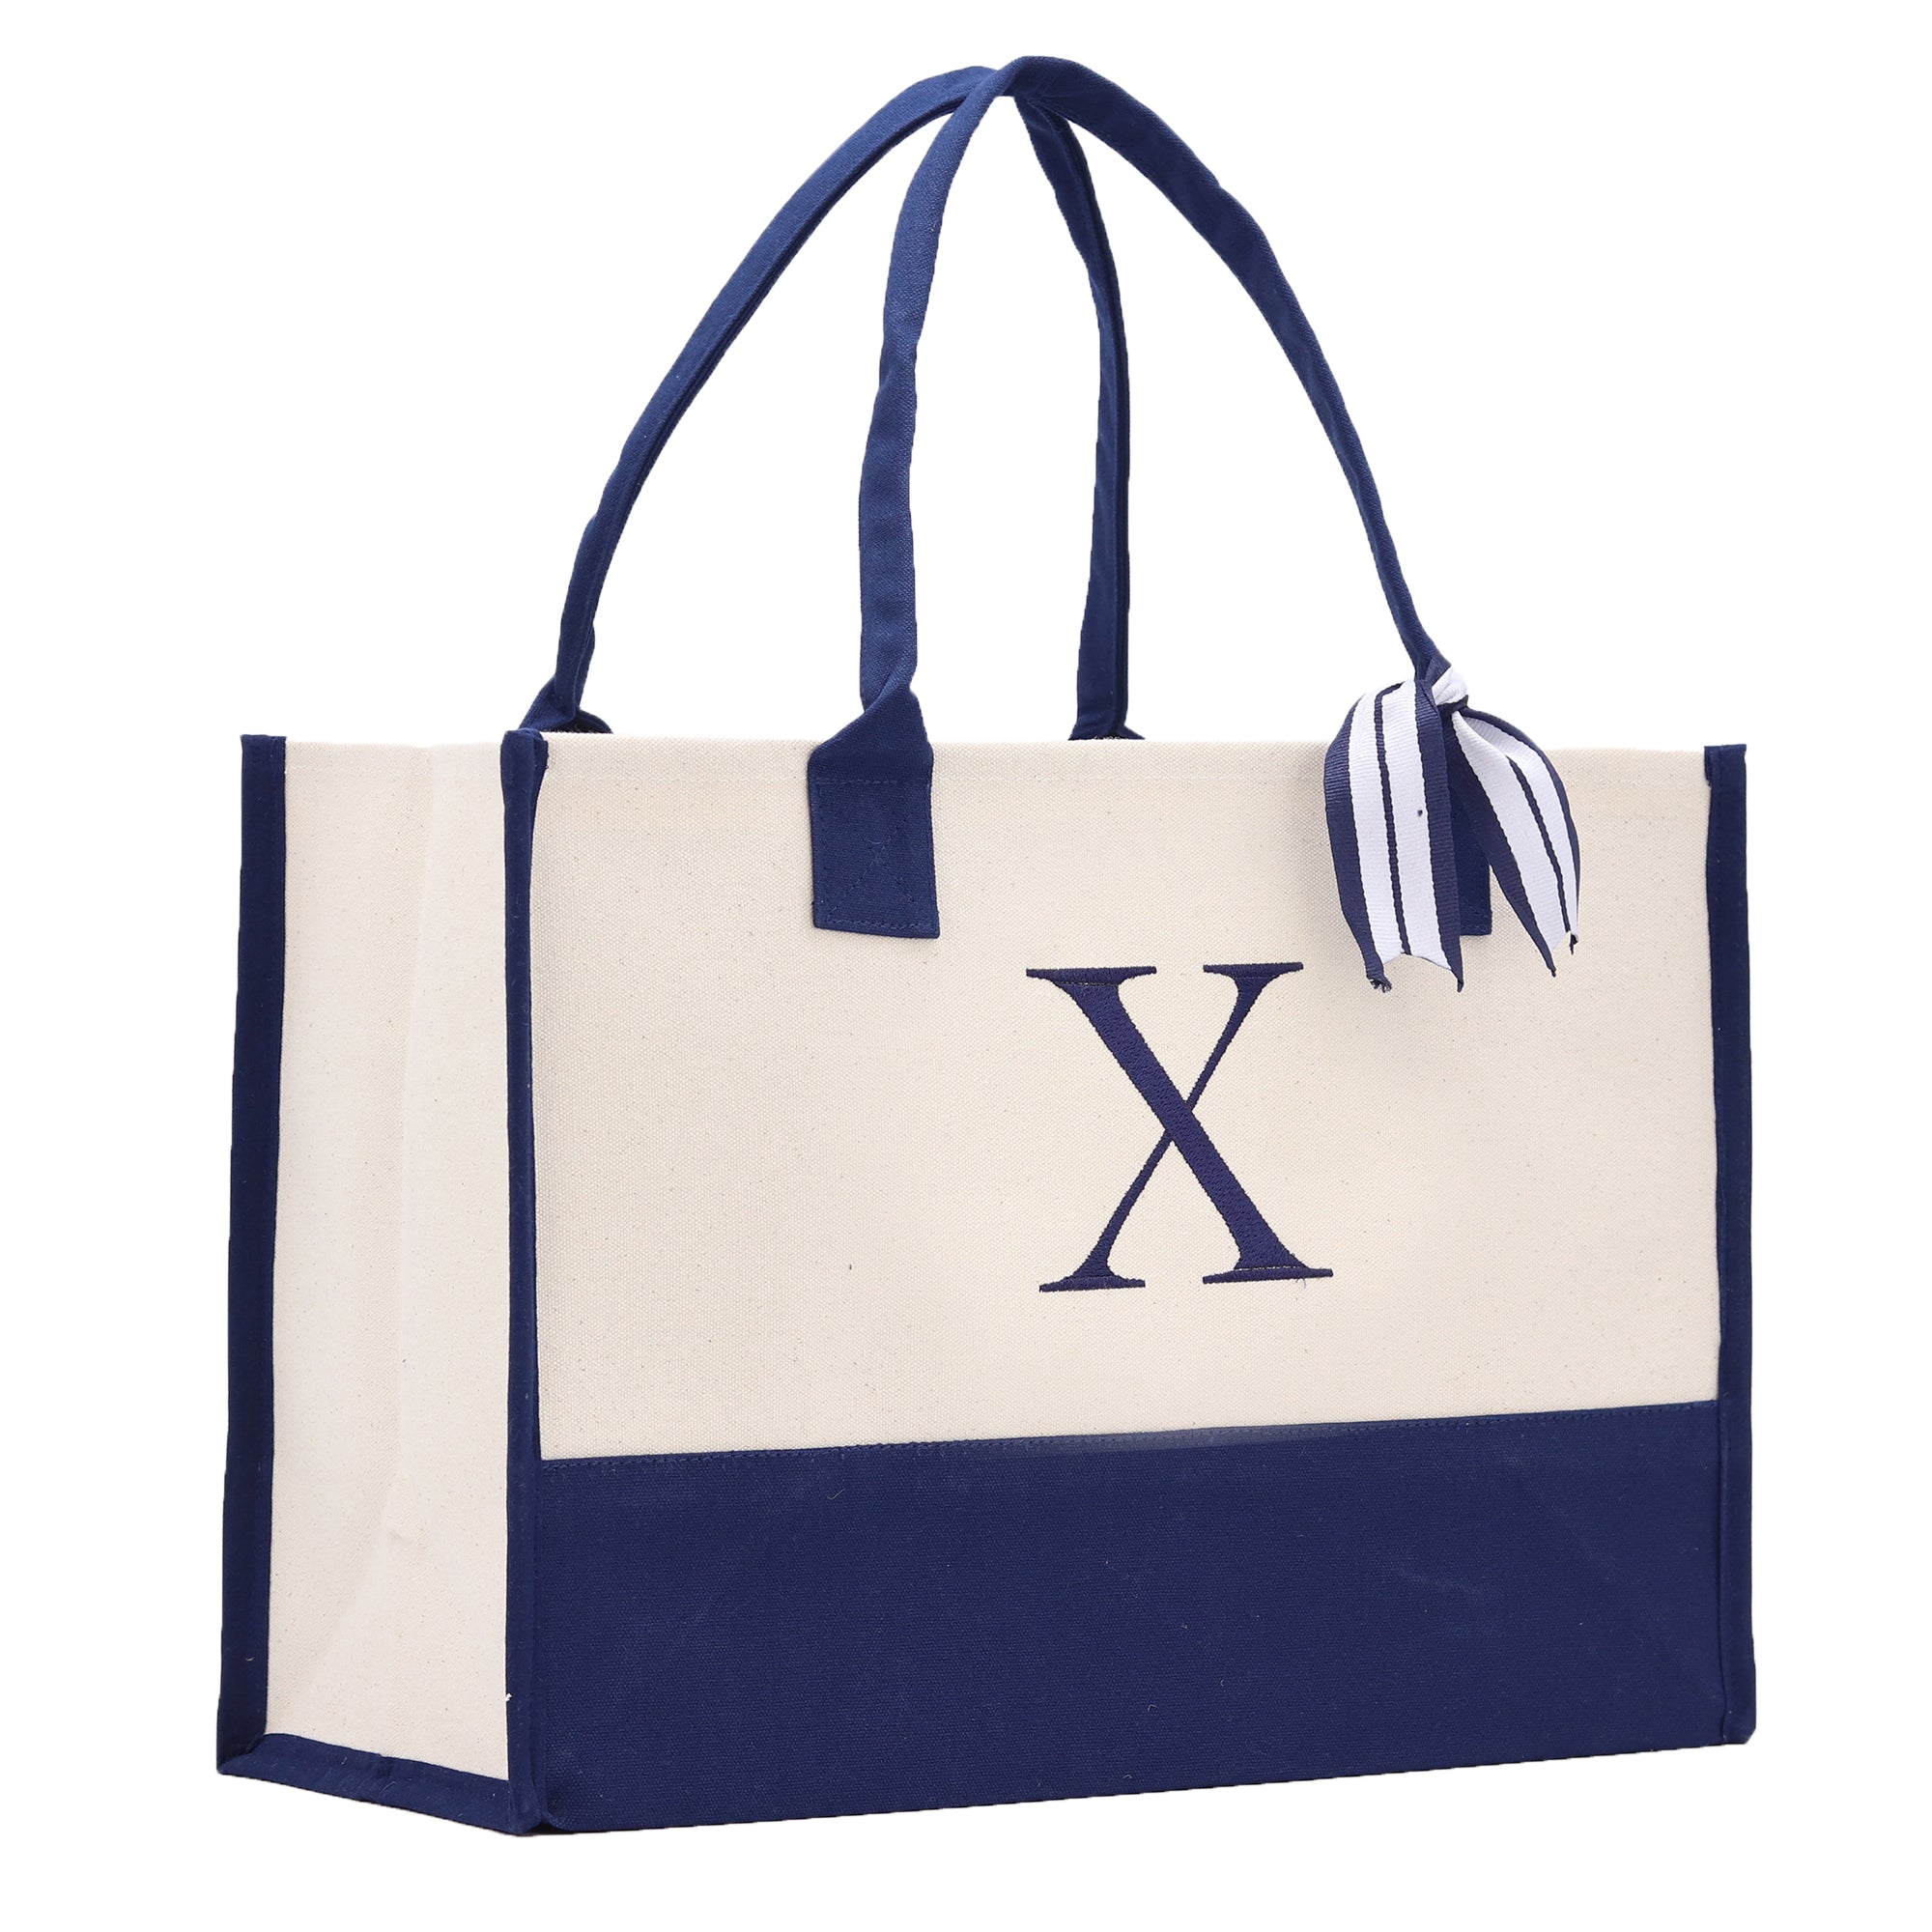 Monogram Tote Bag with 100% Cotton Canvas and a Chic Personalized Monogram Navy Blue Vanessa Rosella Block X 